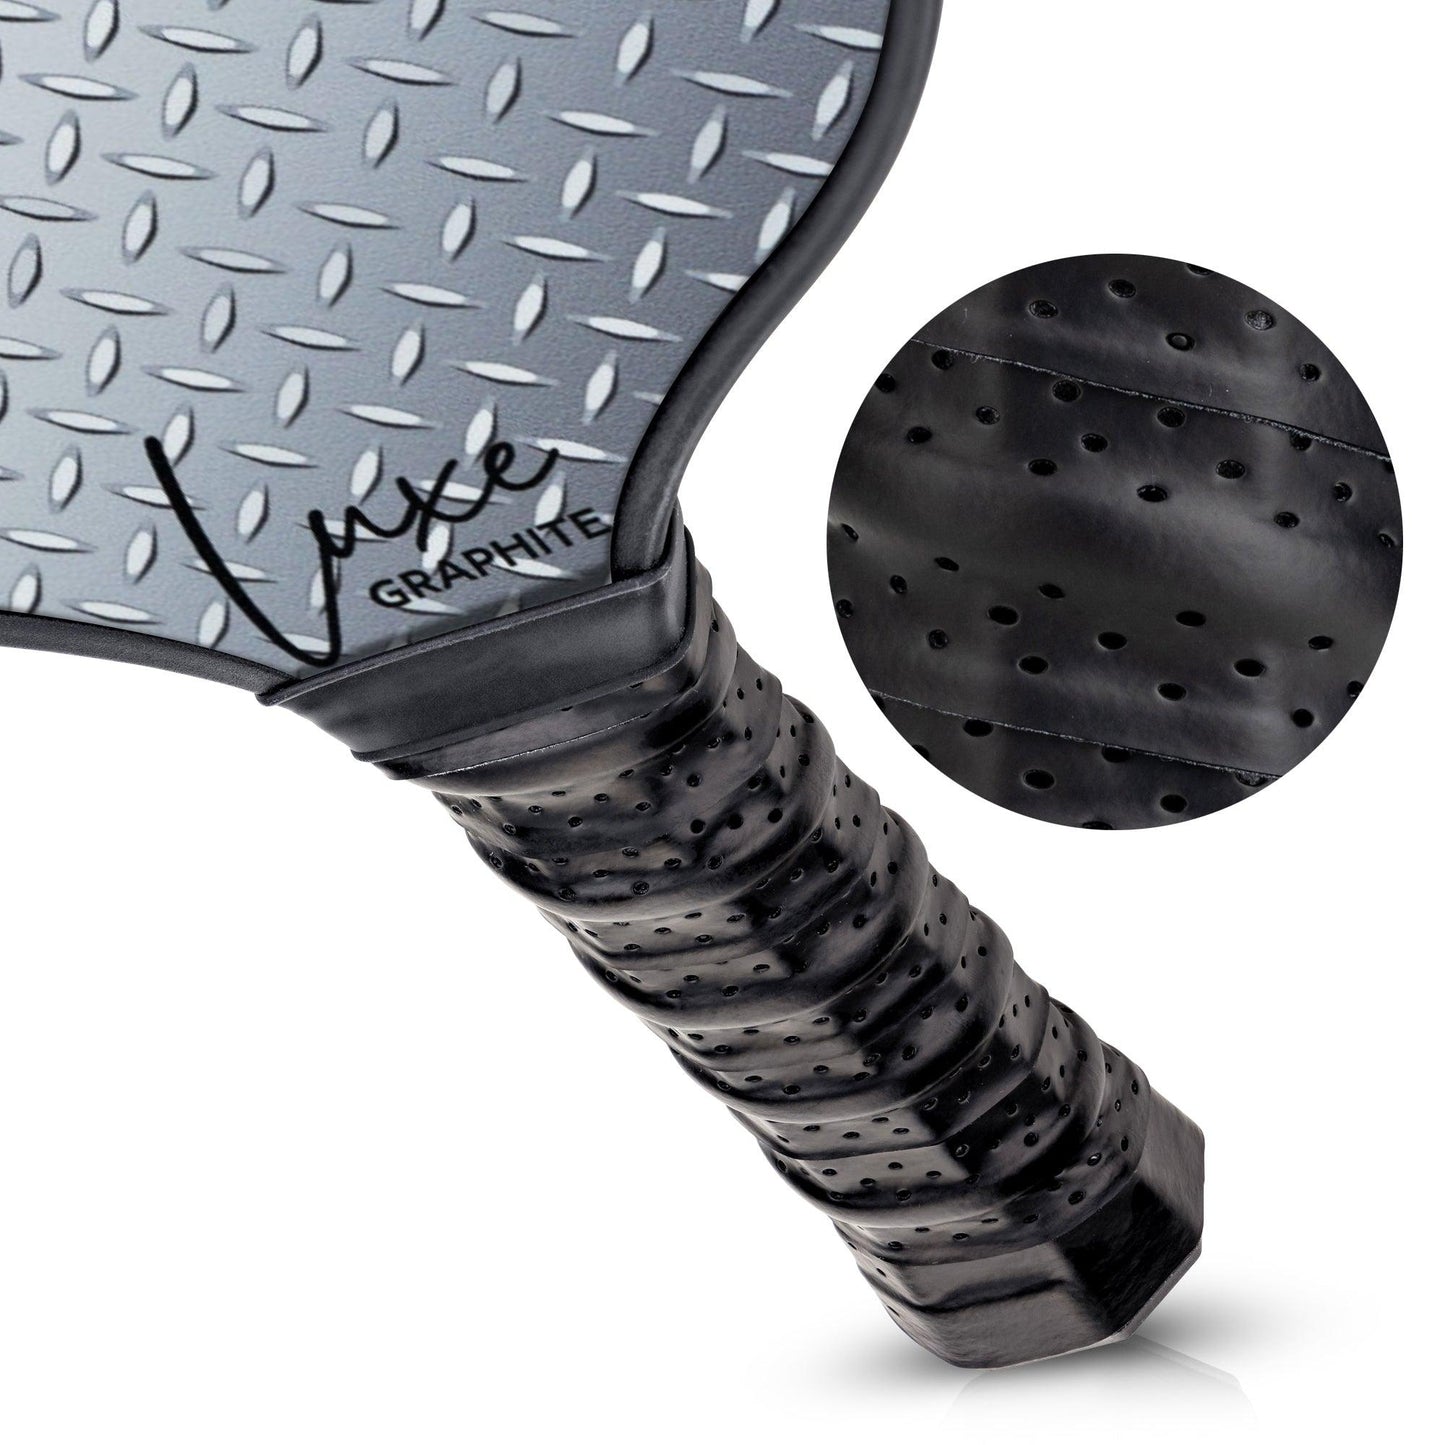 Steel Plated Luxe Graphite Pickleball Paddle with Cover